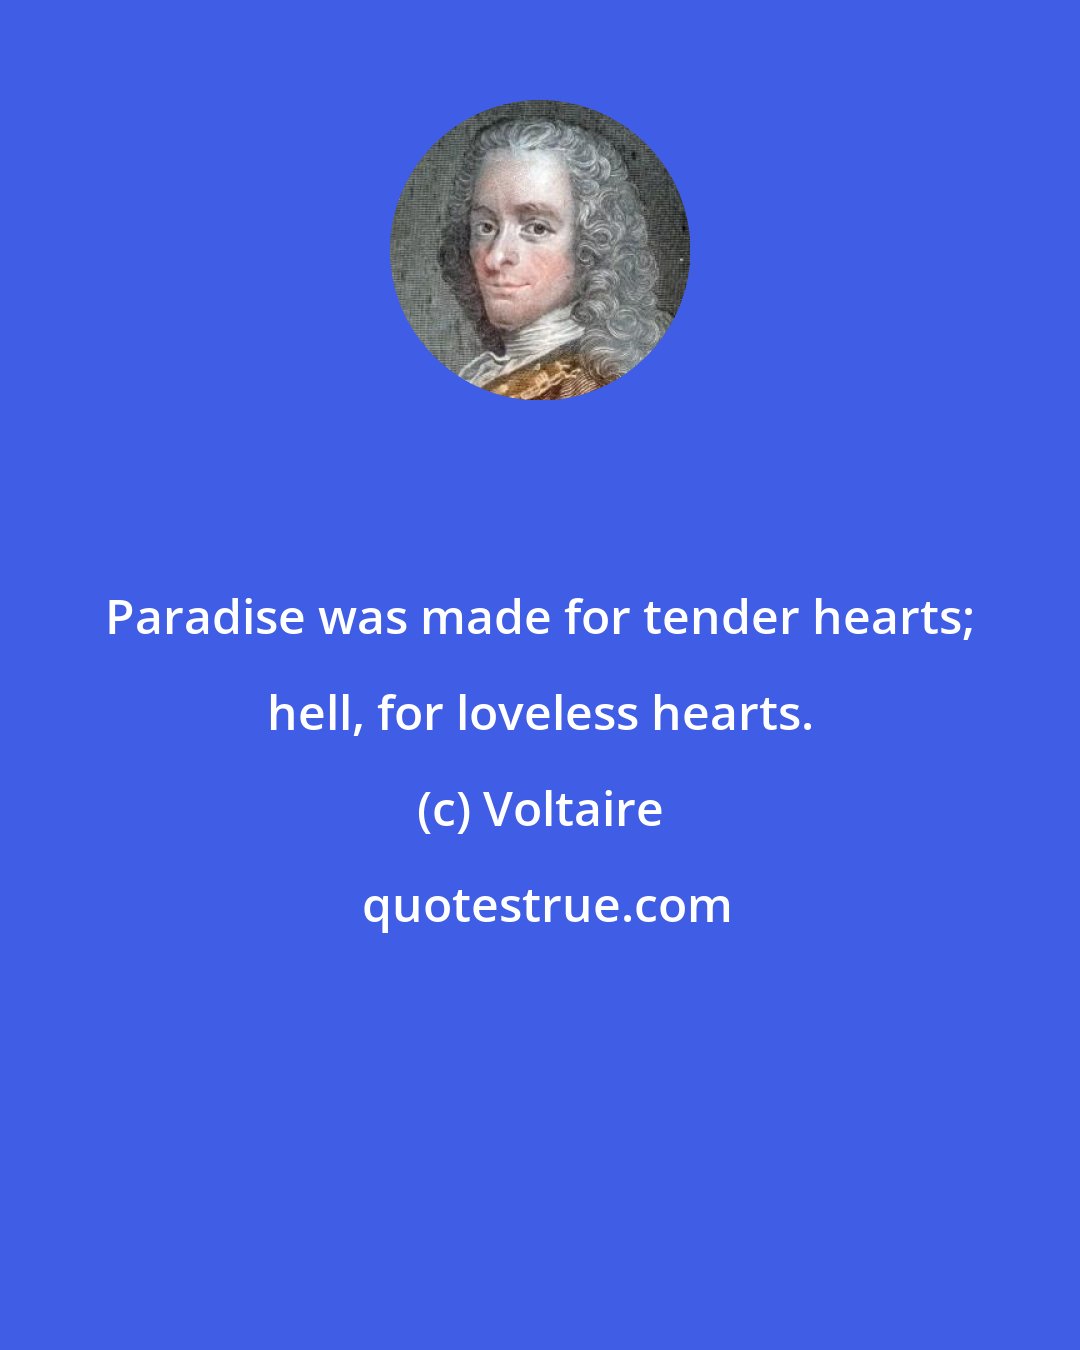 Voltaire: Paradise was made for tender hearts; hell, for loveless hearts.